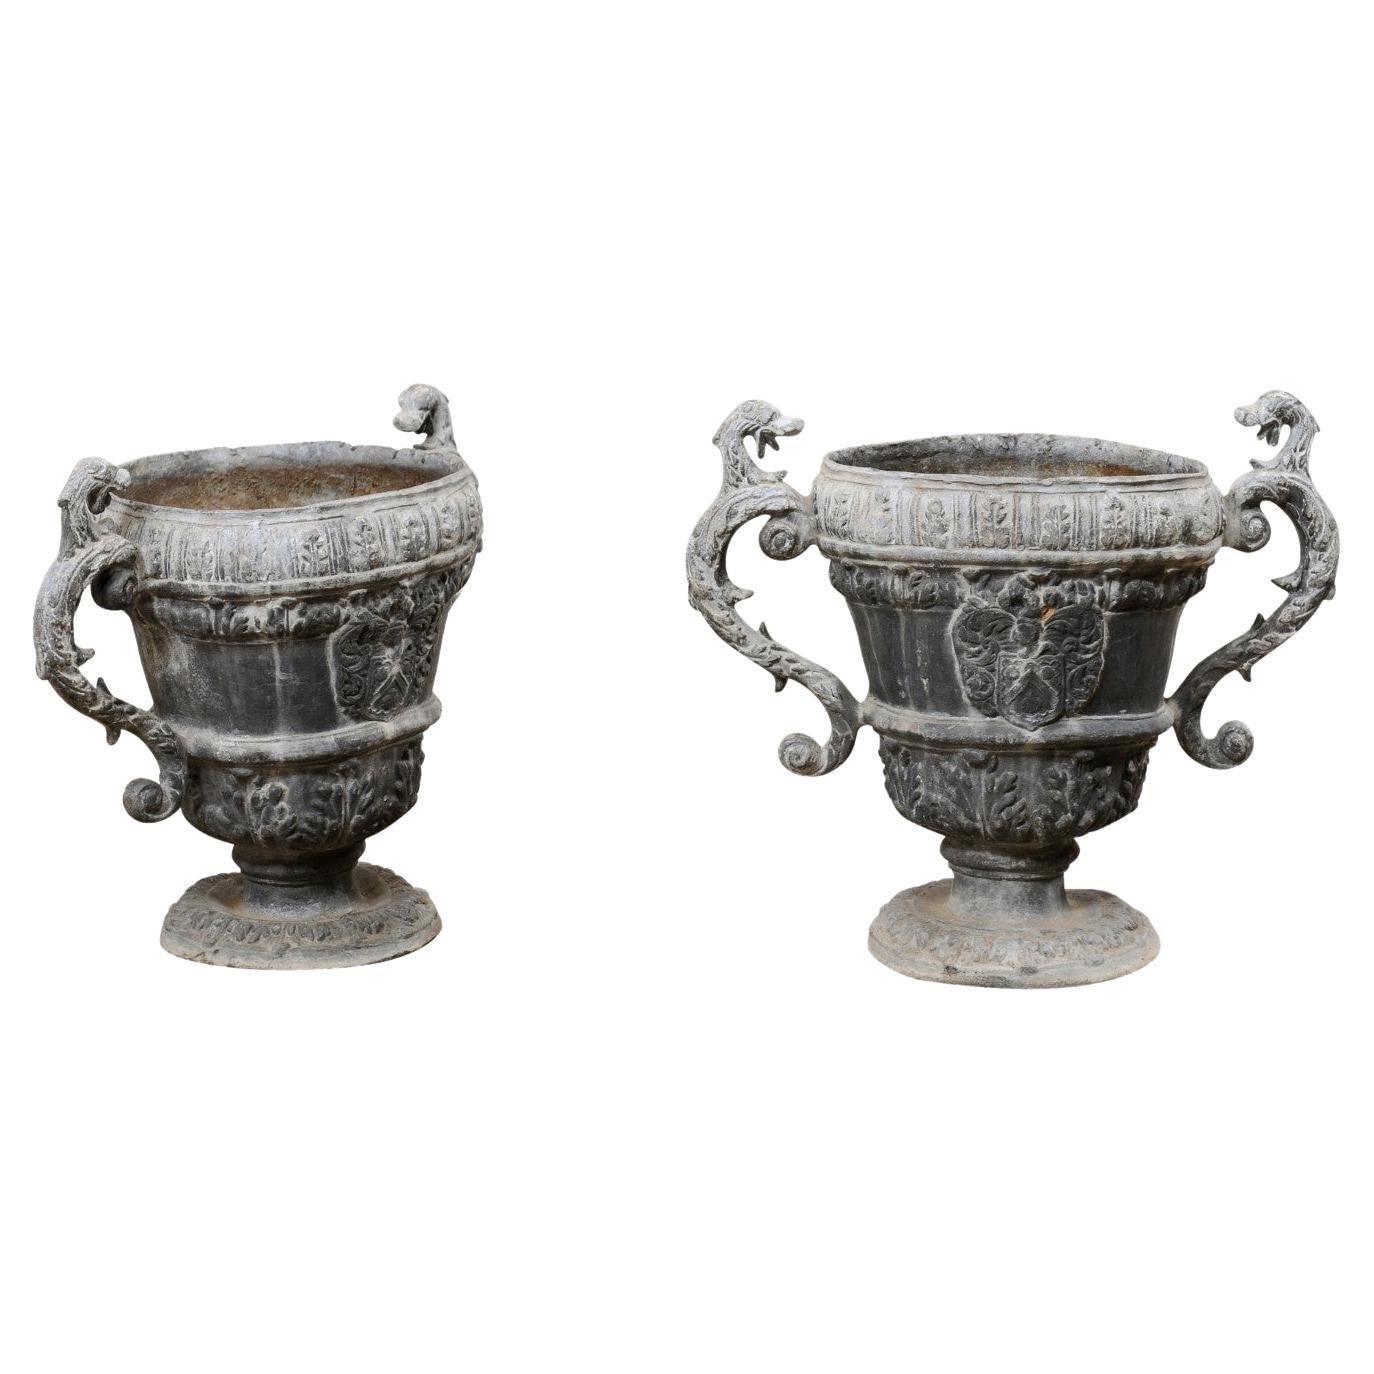 French Pair of 18th C. Decorative Lead Urn Planters for Garden Patio For Sale